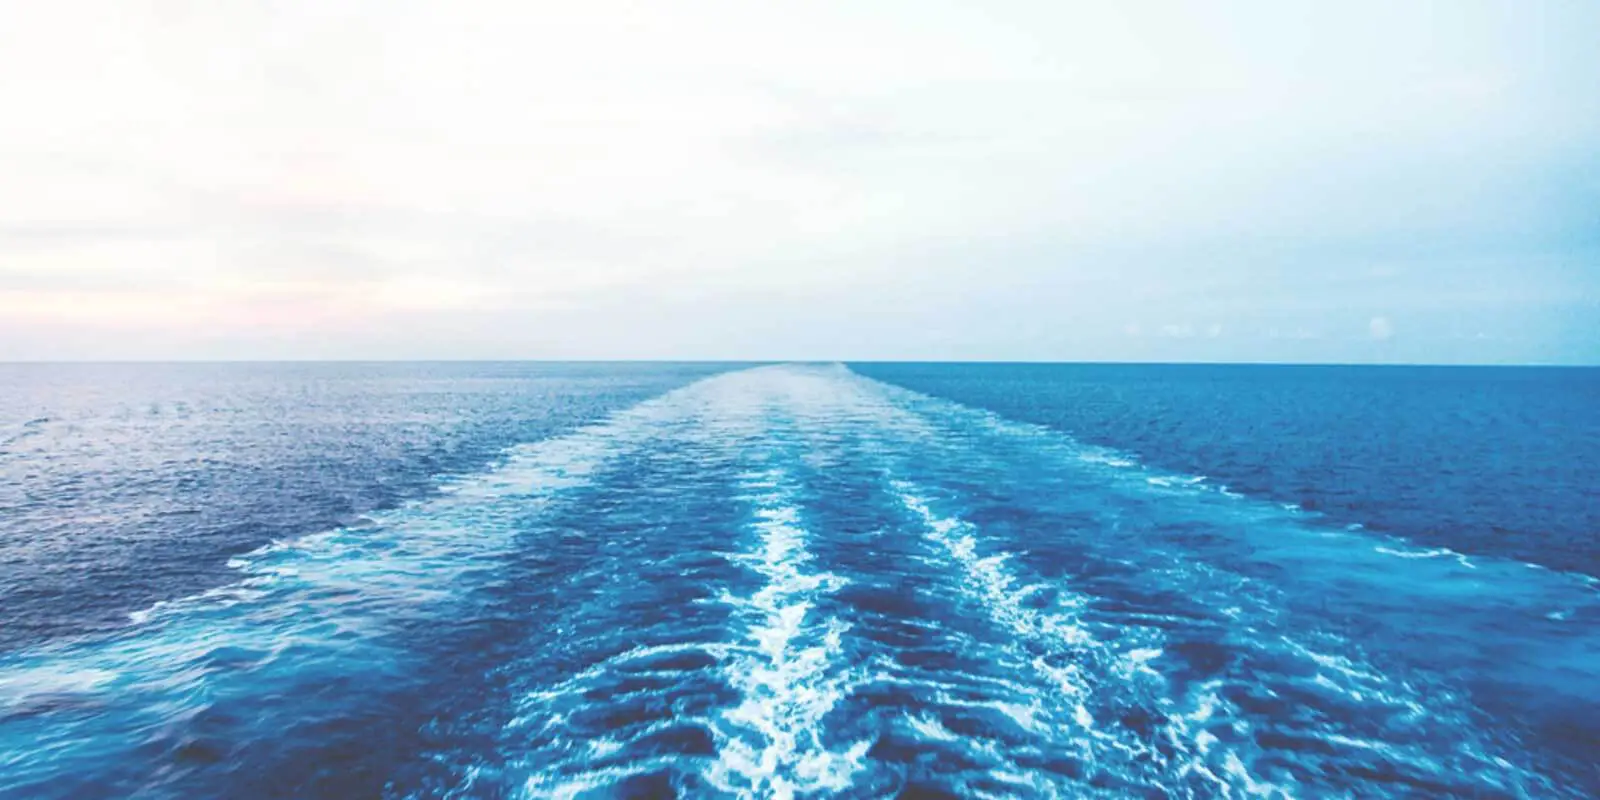 Landscape view of an open ocean with the wake trail from a cruise ship.